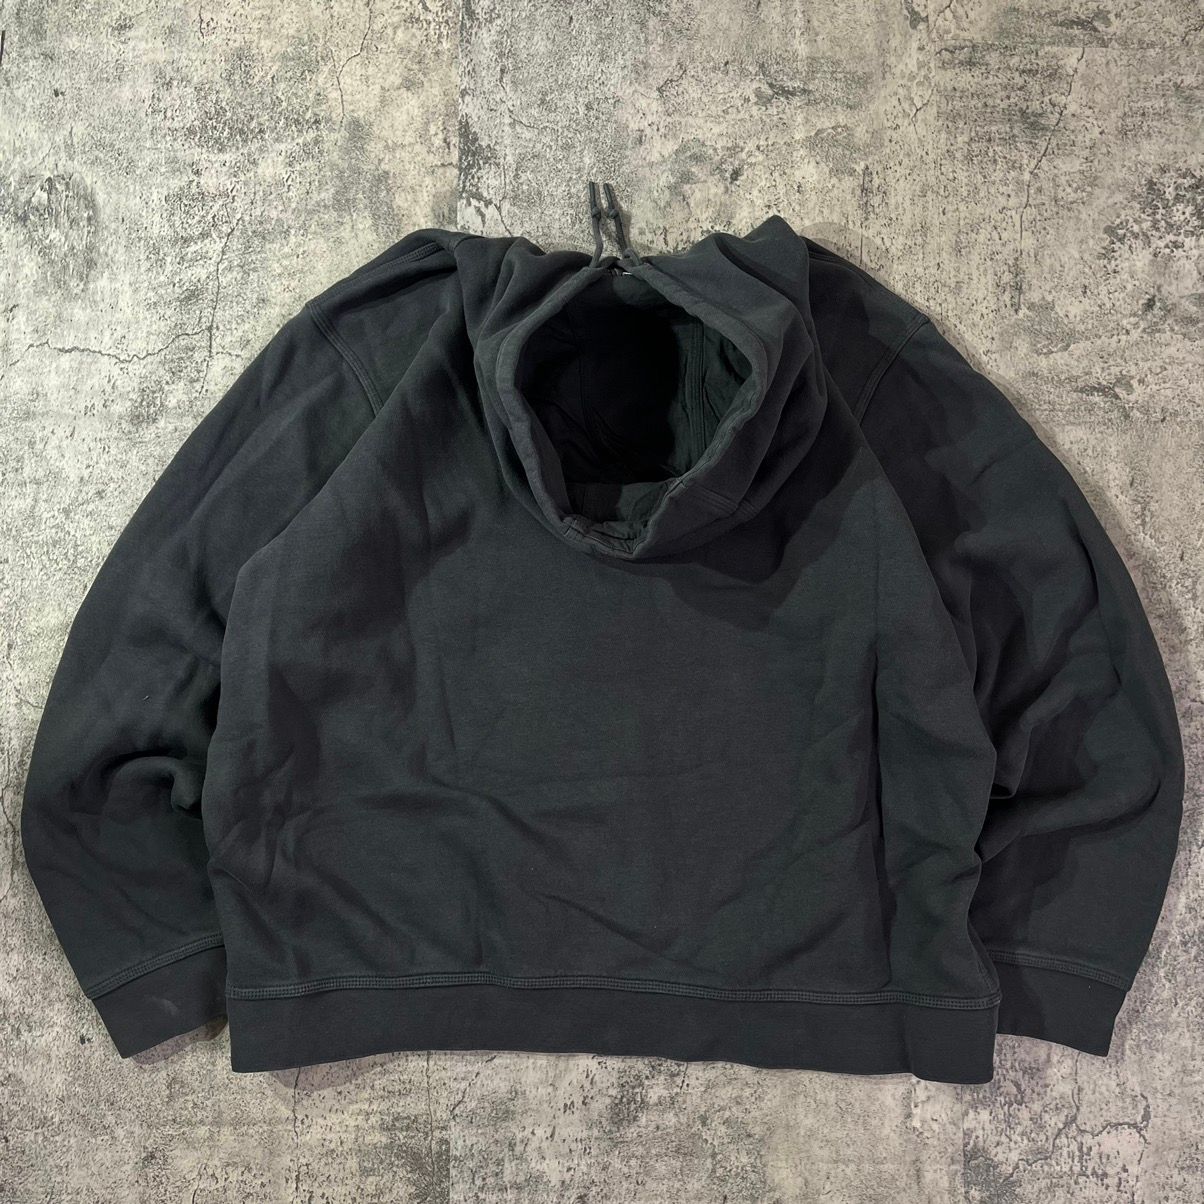 Nike Crazy Vintage Black Faded Nike Hoodie Oversized Boxy Size US XL / EU 56 / 4 - 2 Preview